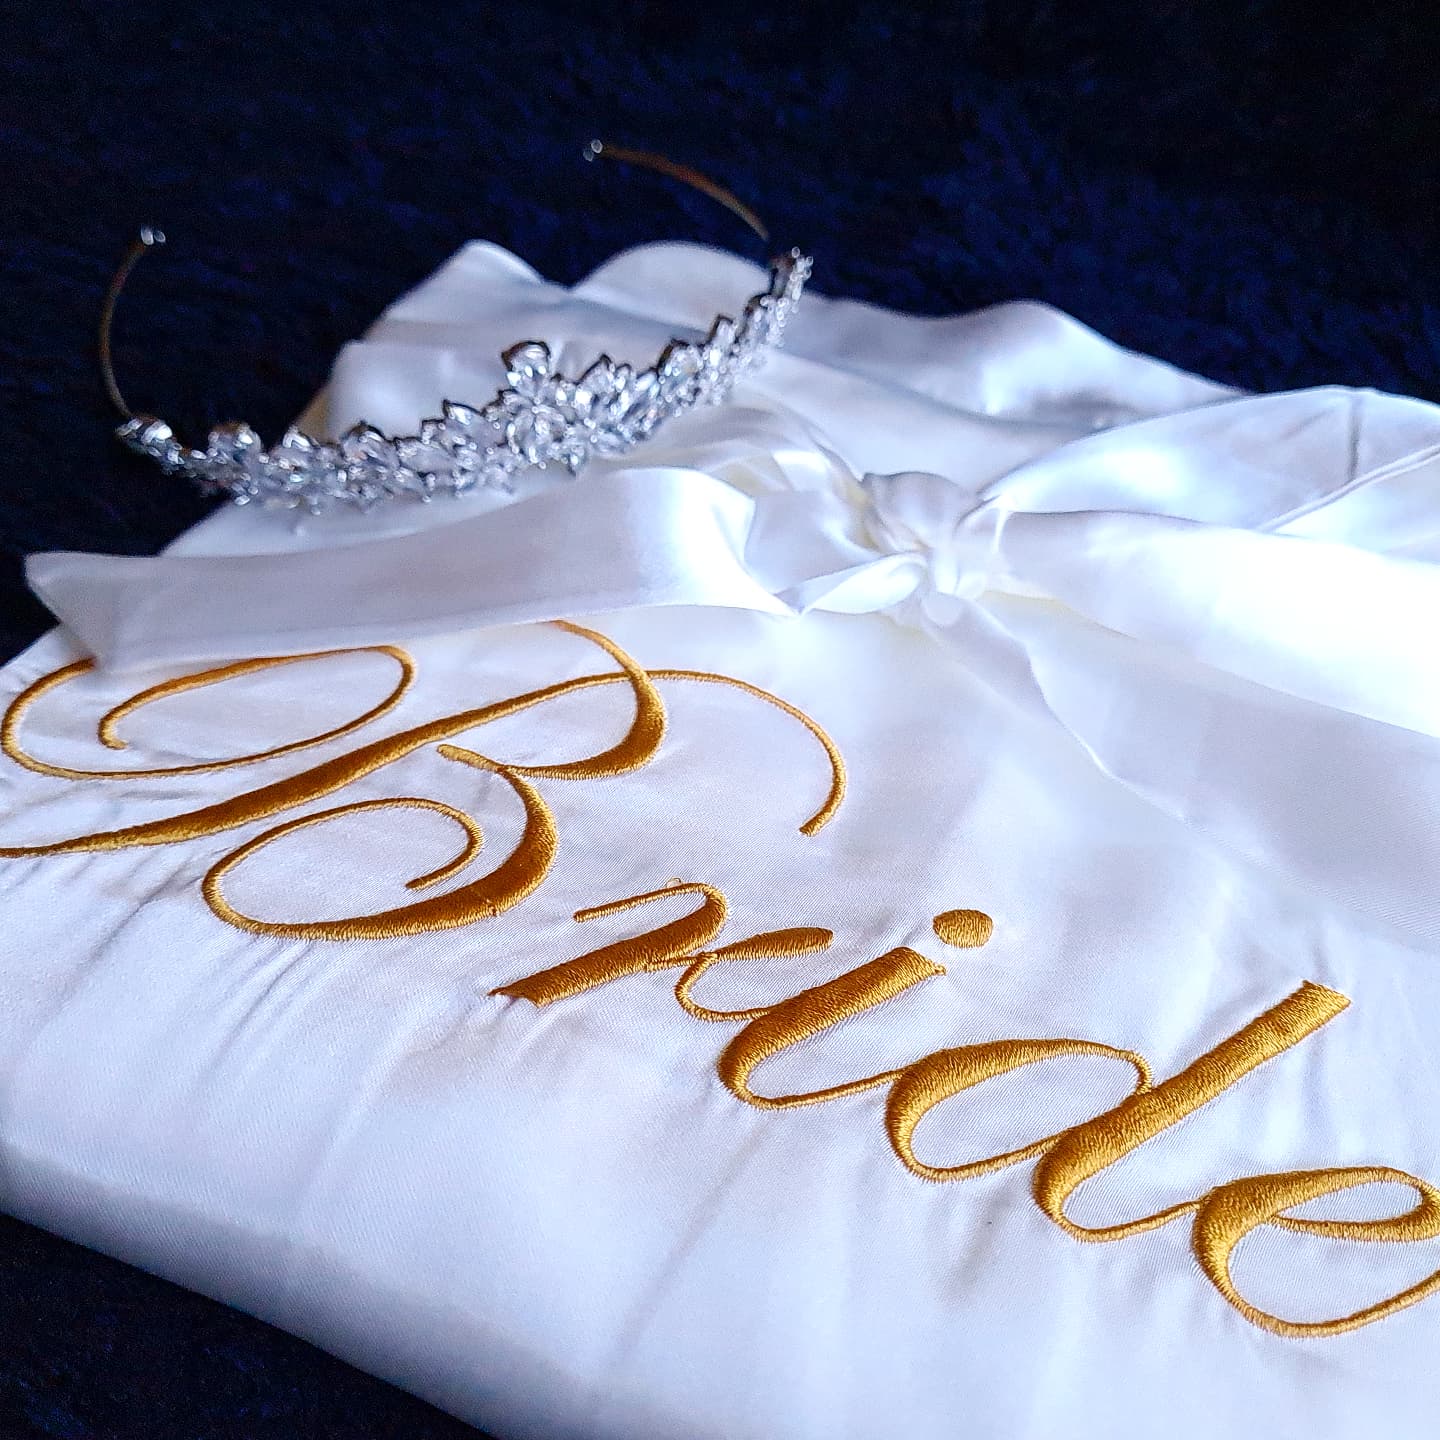 a side shot of A white kimono with the word "bride" embroidered on it. The kimono is made of silk and has a simple design. The word "bride" is embroidered in gold thread and is located in the center of the kimono. The kimono is very elegant and would be perfect for a wedding.